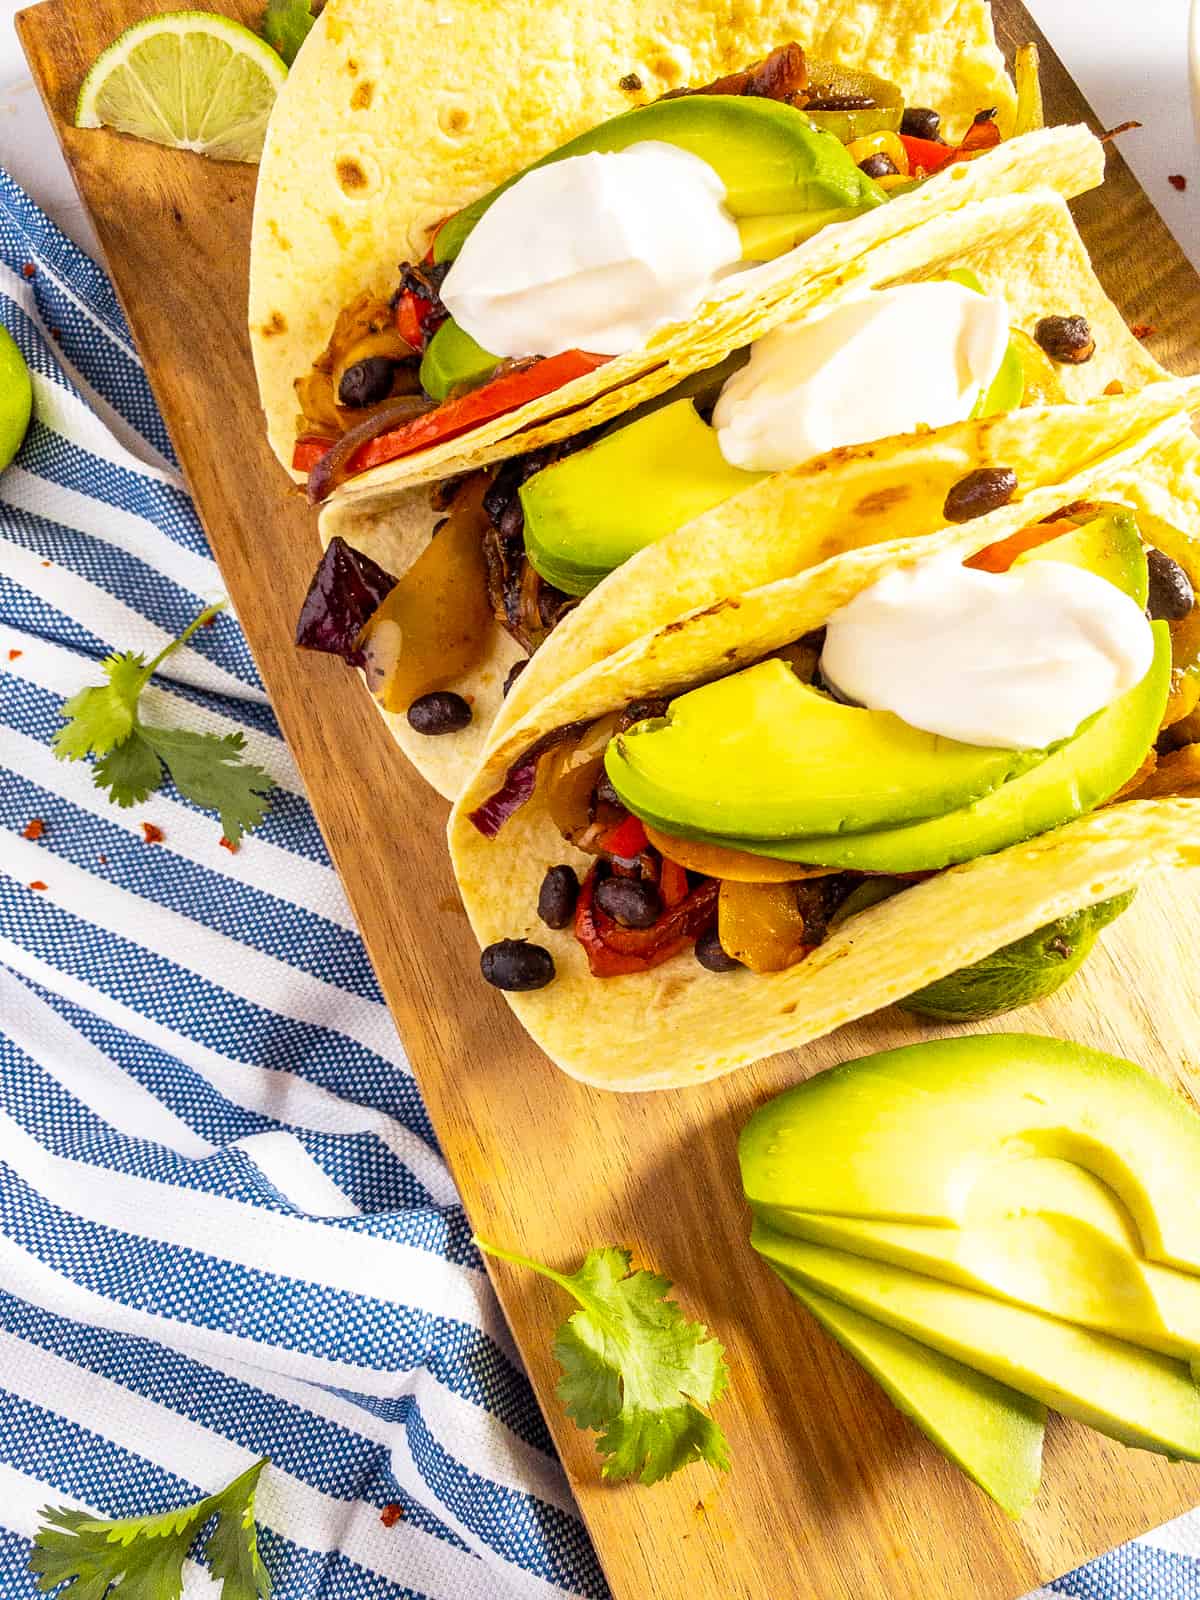 three tortilla wraps filled with vegetarian fajitas on a wooden board